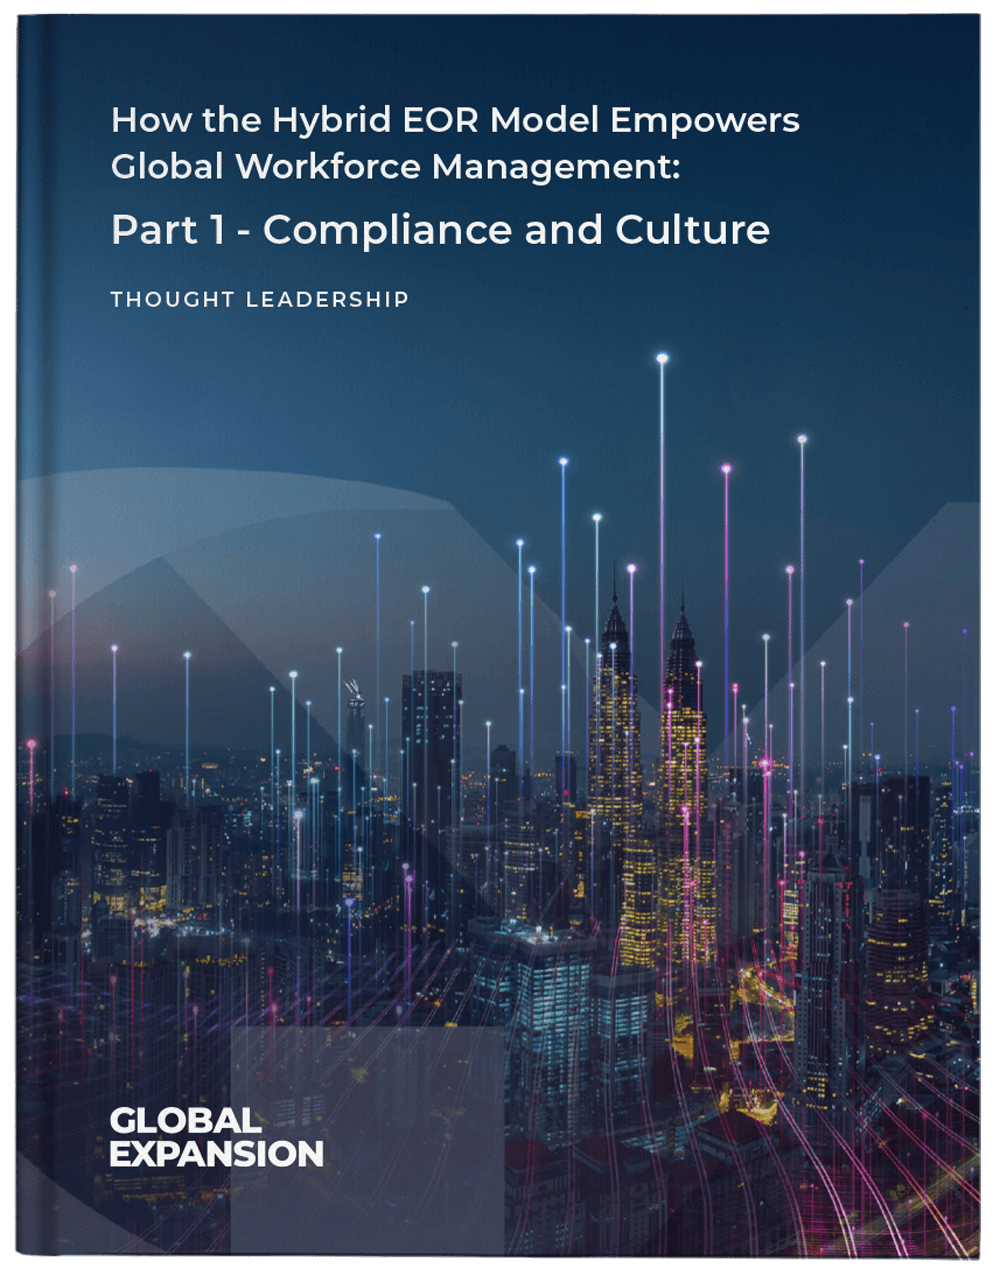 How-the-Hybrid-EOR-Model-Empowers-Global-Workforce-Management-Part-1-Cover